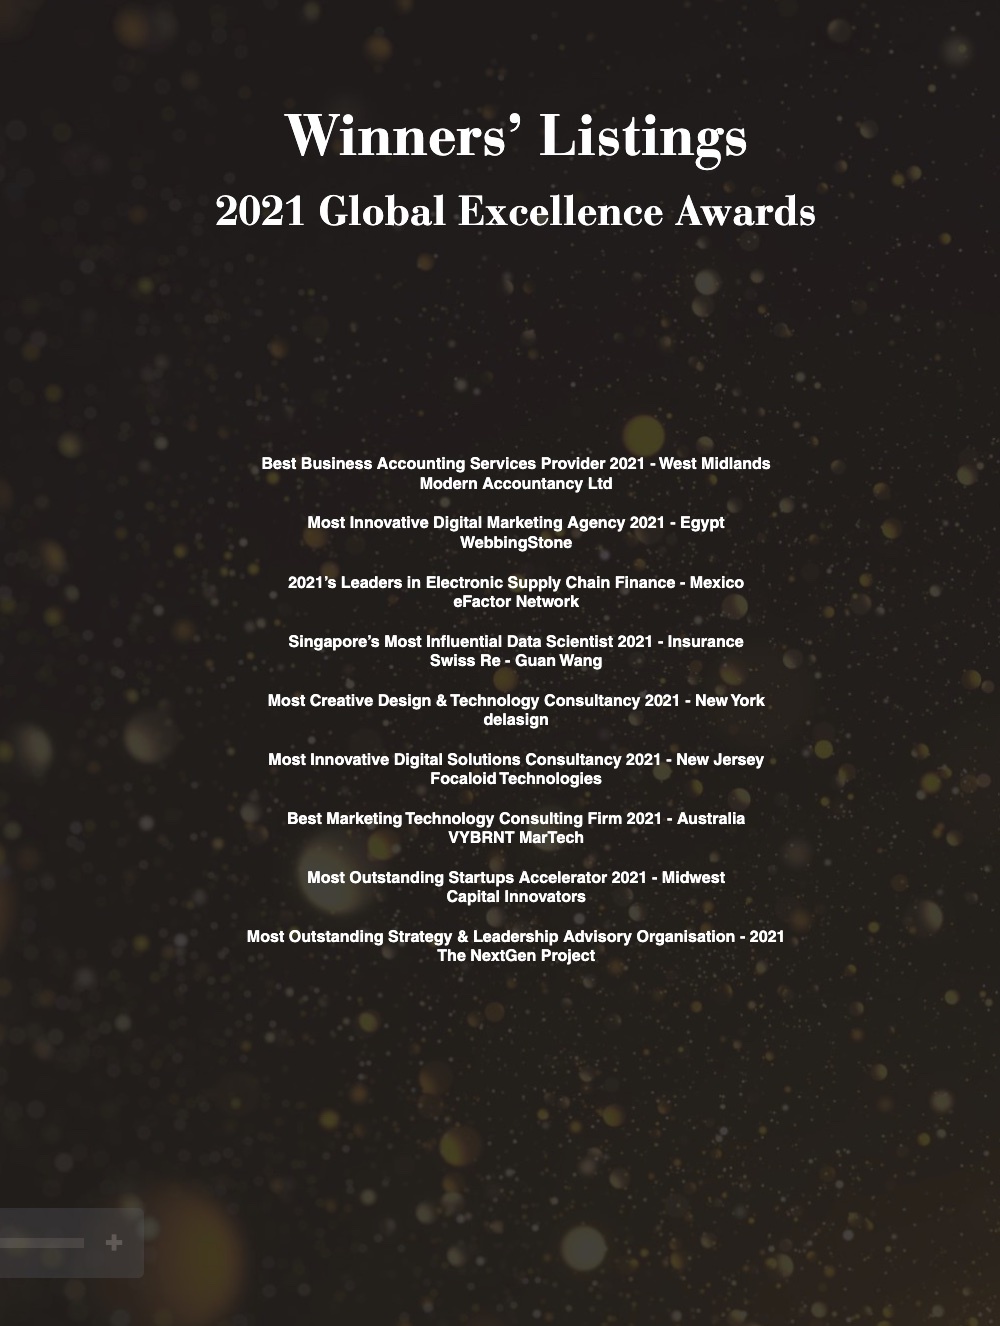 Acquisition International Issue 5 Winners Listing